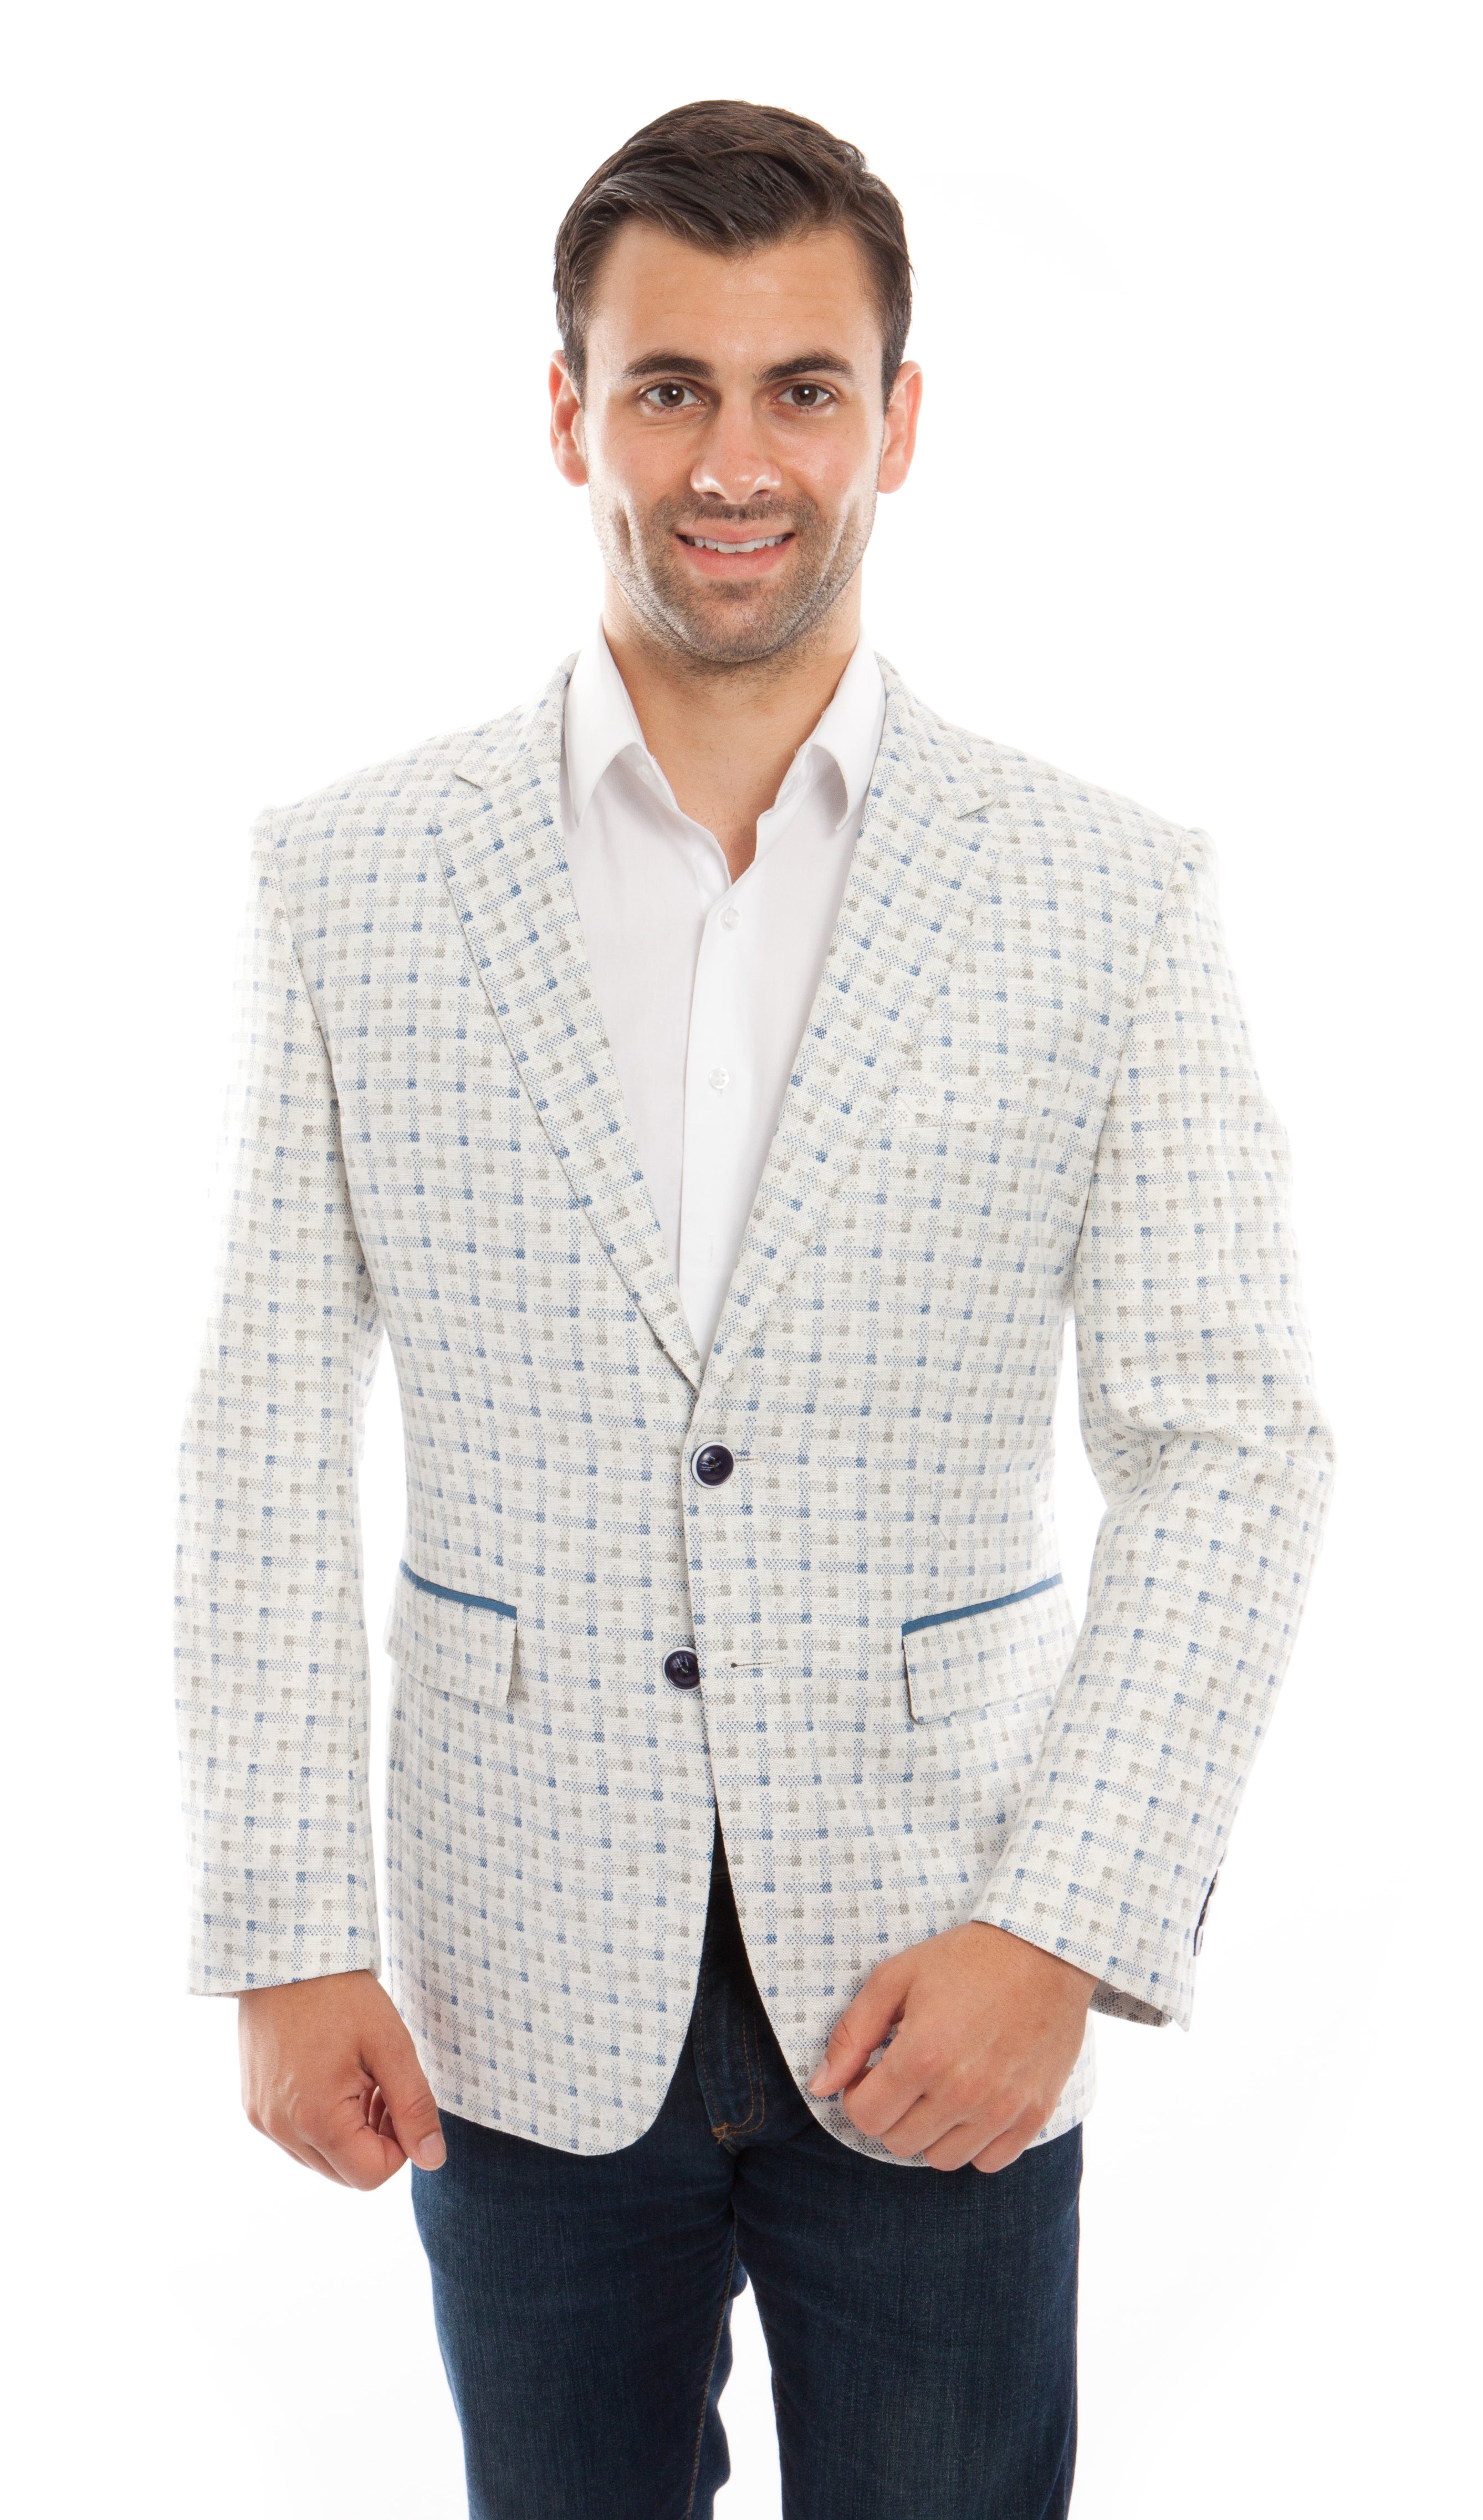 White / Blue Jackets For Men Jacket Suits For All Ocassions MJ213-01